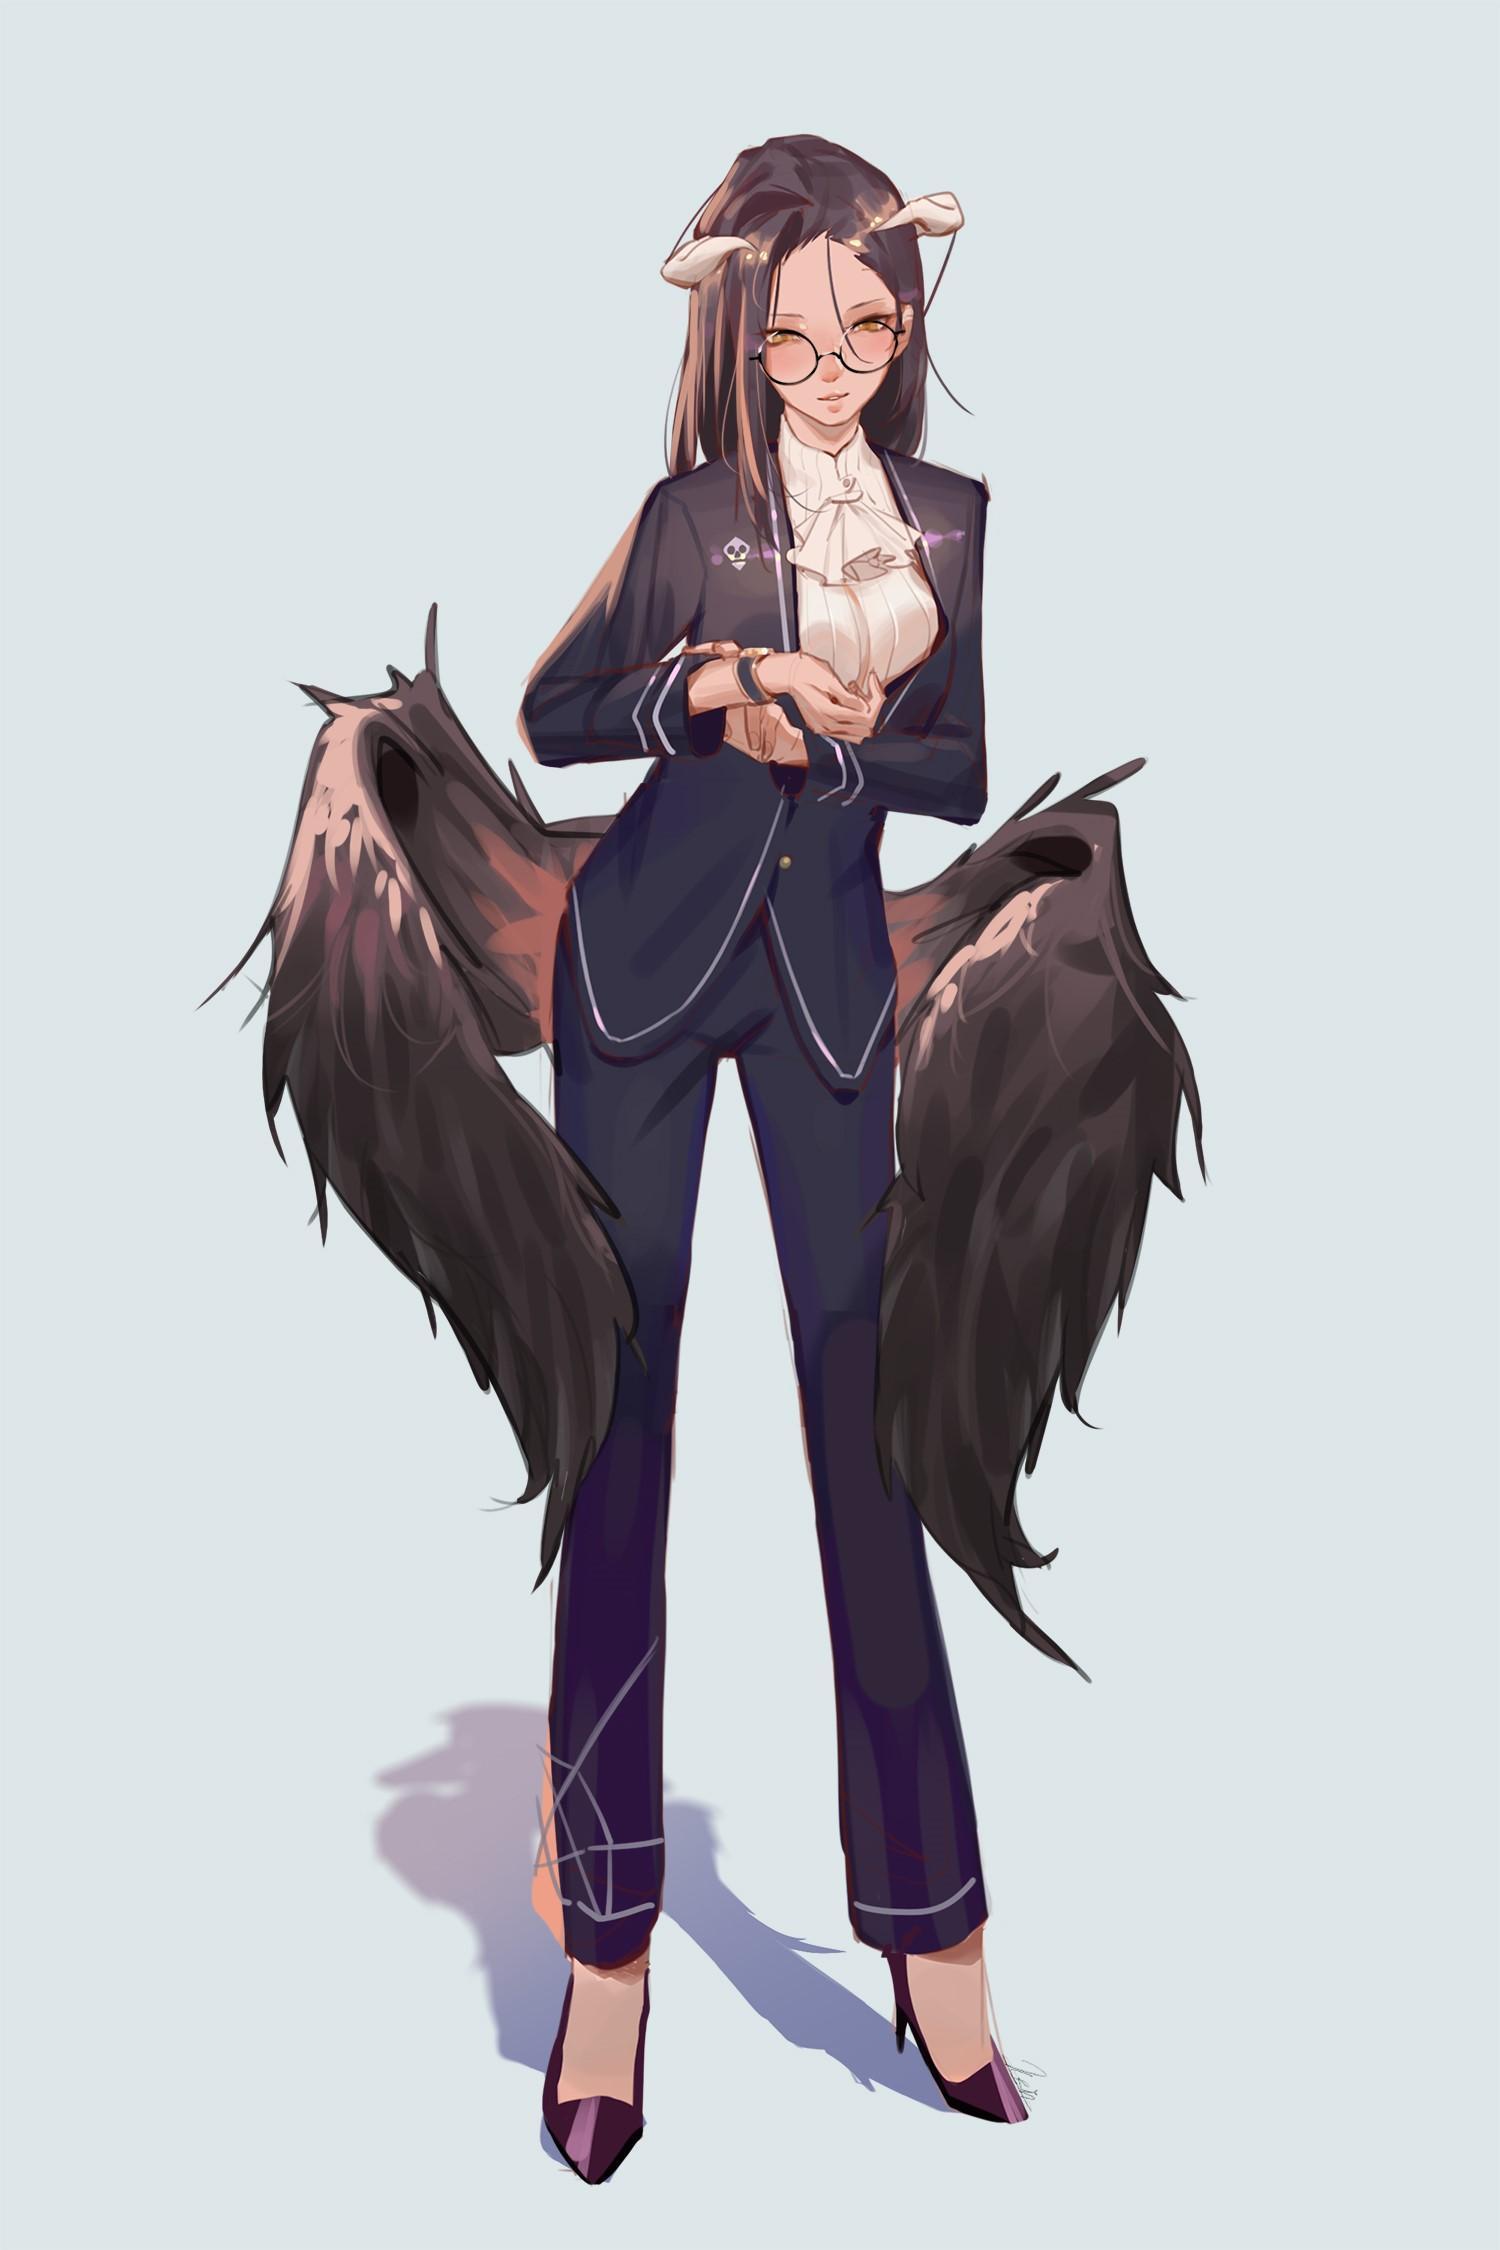 HD wallpaper, Fan Art, Succubus, Yellow Eyes, Office Uniform, Demon Girls, Smiling, Black Hair, Curvy, Krin, Hair In Face, Vertical, Anime, Big Boobs, Black Suit, Demon Horns, Simple Background, Women With Glasses, Blushing, Alternate Outfit, Overlord Anime, Black Heels, Monster Girl, Looking Below, Black Wings, Long Hair, Bent Over, Wristwatch, Office Girl, Albedo Overlord, Thighs, 2D, Anime Girls